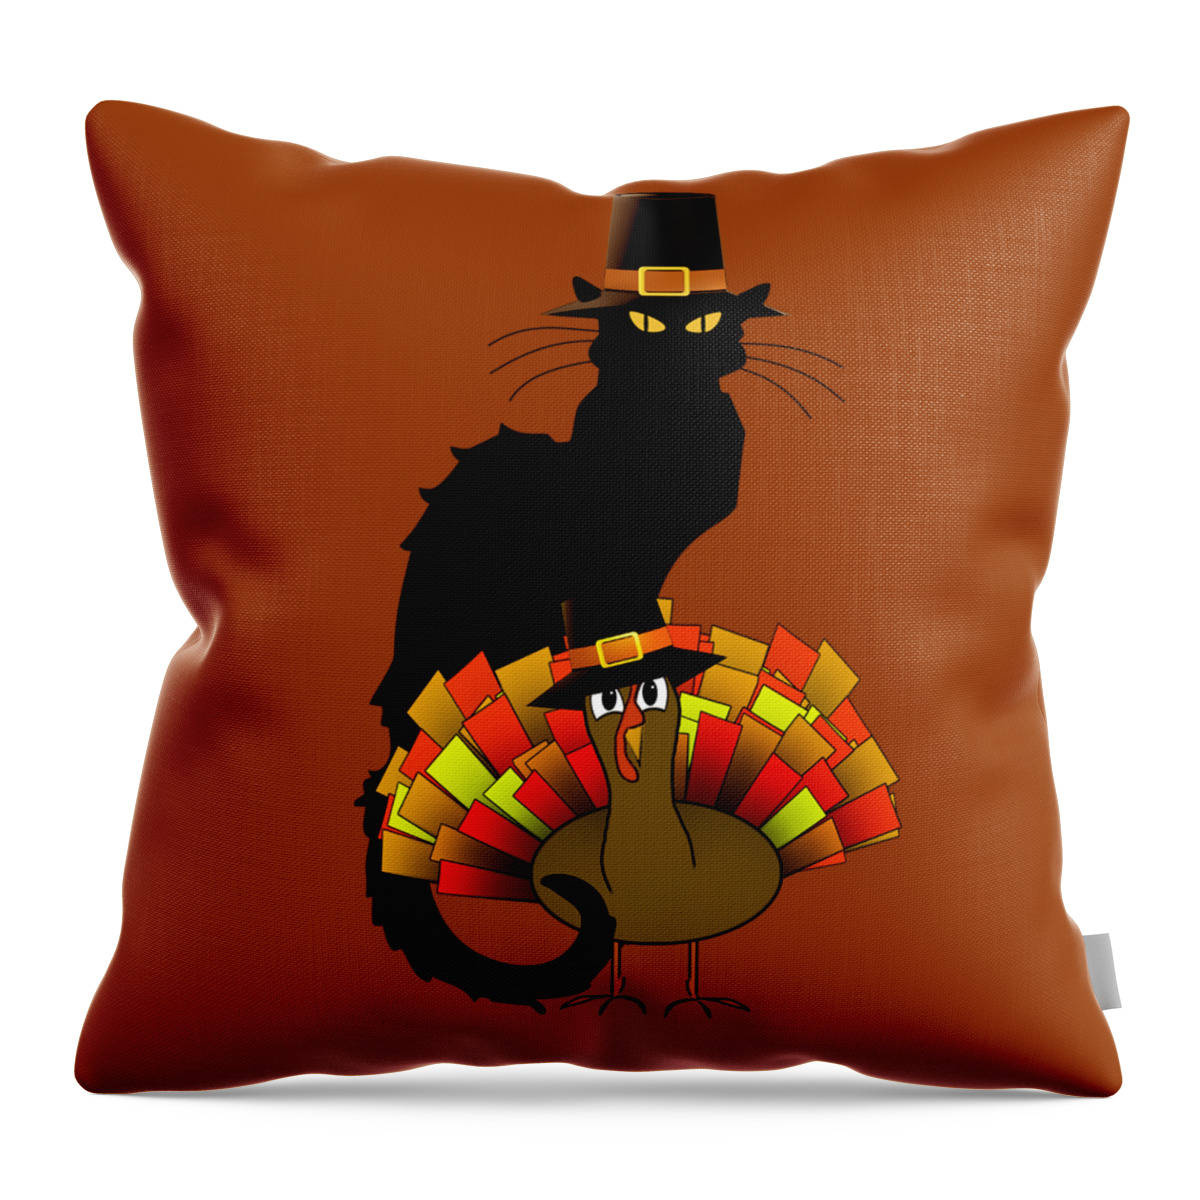 Thanksgiving Throw Pillow featuring the digital art Thanksgiving Le Chat Noir With Turkey Pilgrim by Gravityx9 Designs